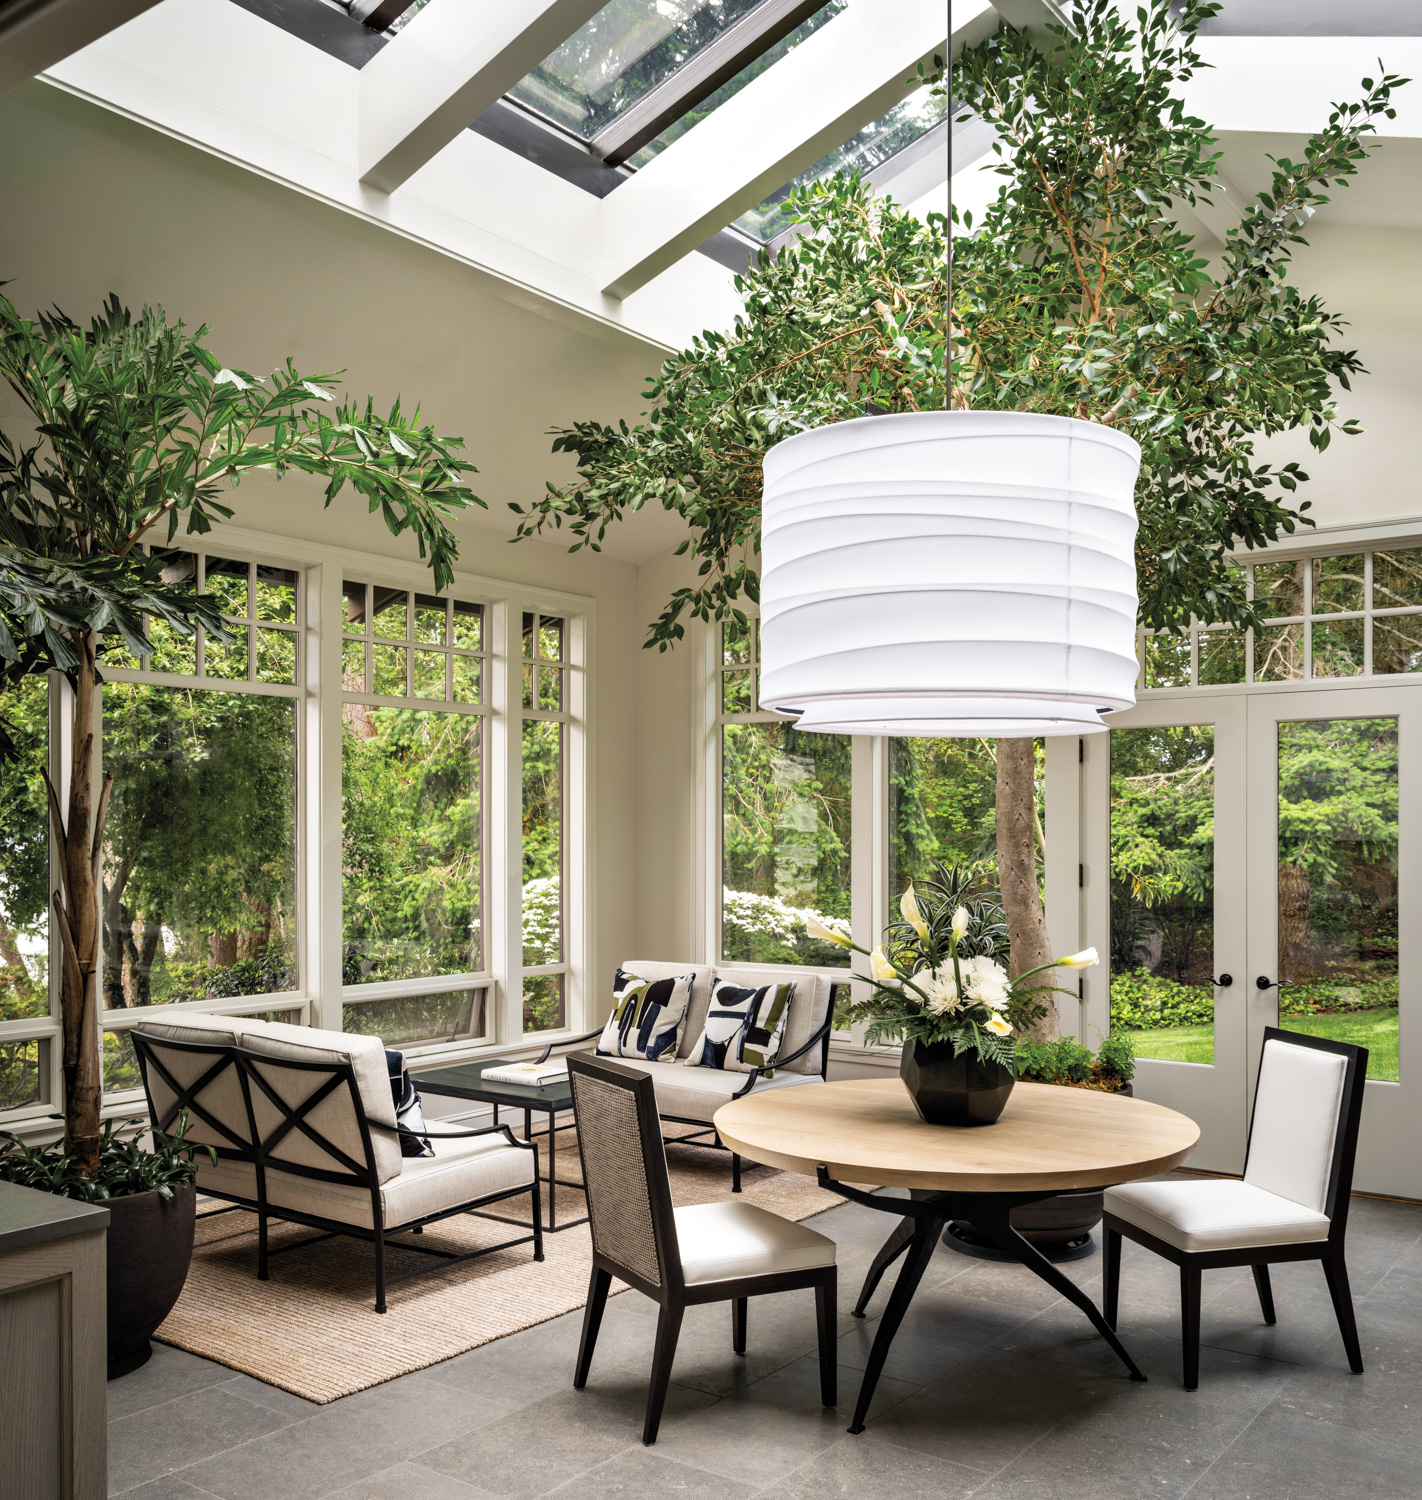 wellness room has a large light fixture and is inspired by the Whidbey Island landscape